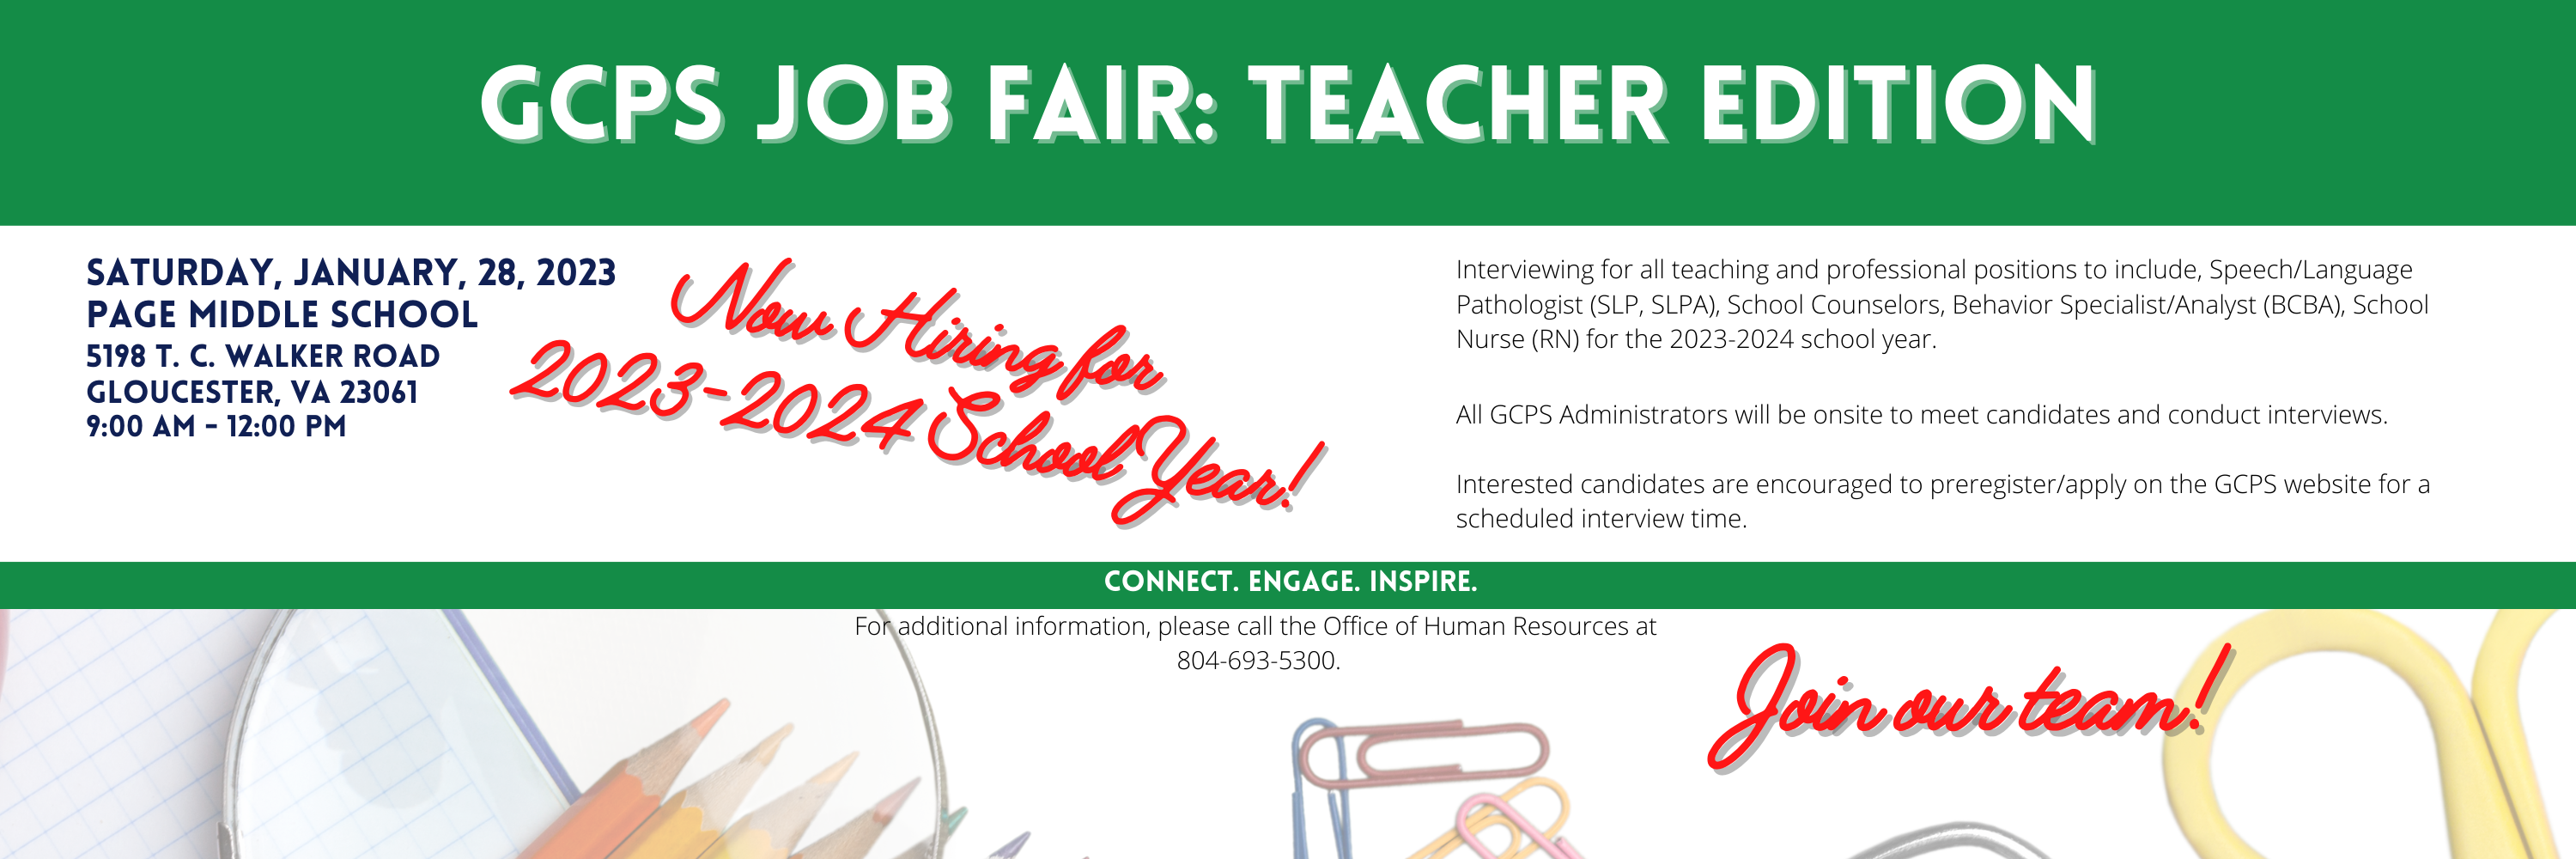 Teacher Job Fair on January 28th from 9:00 AM to Noon.Interviewing for all teaching and professional positions to include, Speech/Language Pathologist (SLP, SLPA), School Counselors, Behavior Specialist/Analyst (BCBA), School Nurse (RN) for the 2023-2024 school year.All GCPS Administrators will be onsite to meet candidates and conduct interviews.   Interested candidates are encouraged to preregister/apply on the GCPS website for a scheduled interview time. For additional information, please call the Office of Human Resources at  804-693-5300.